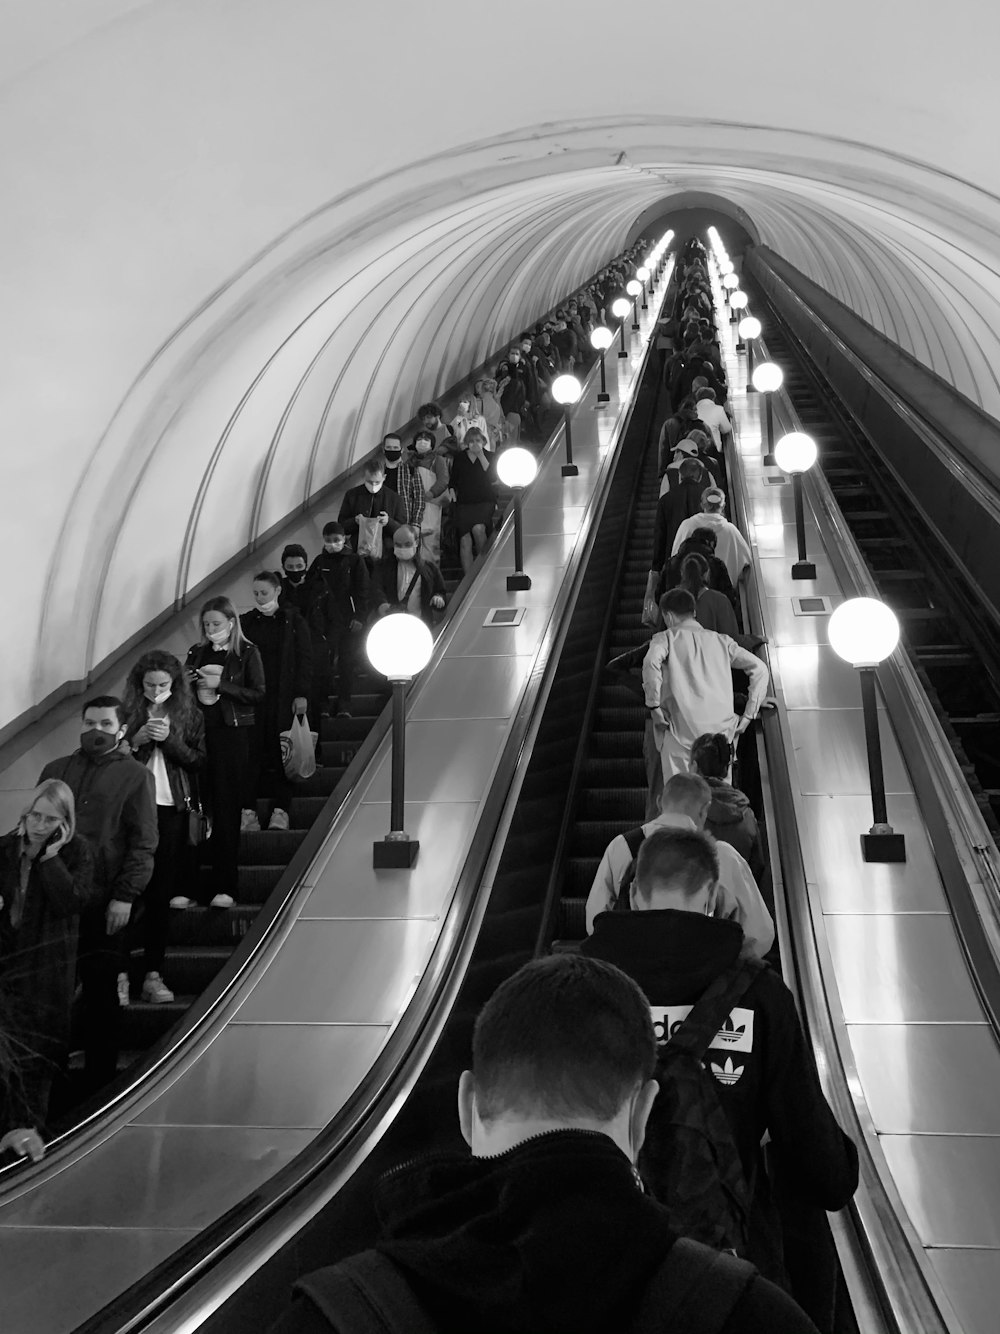 grayscale photo of people in a train station